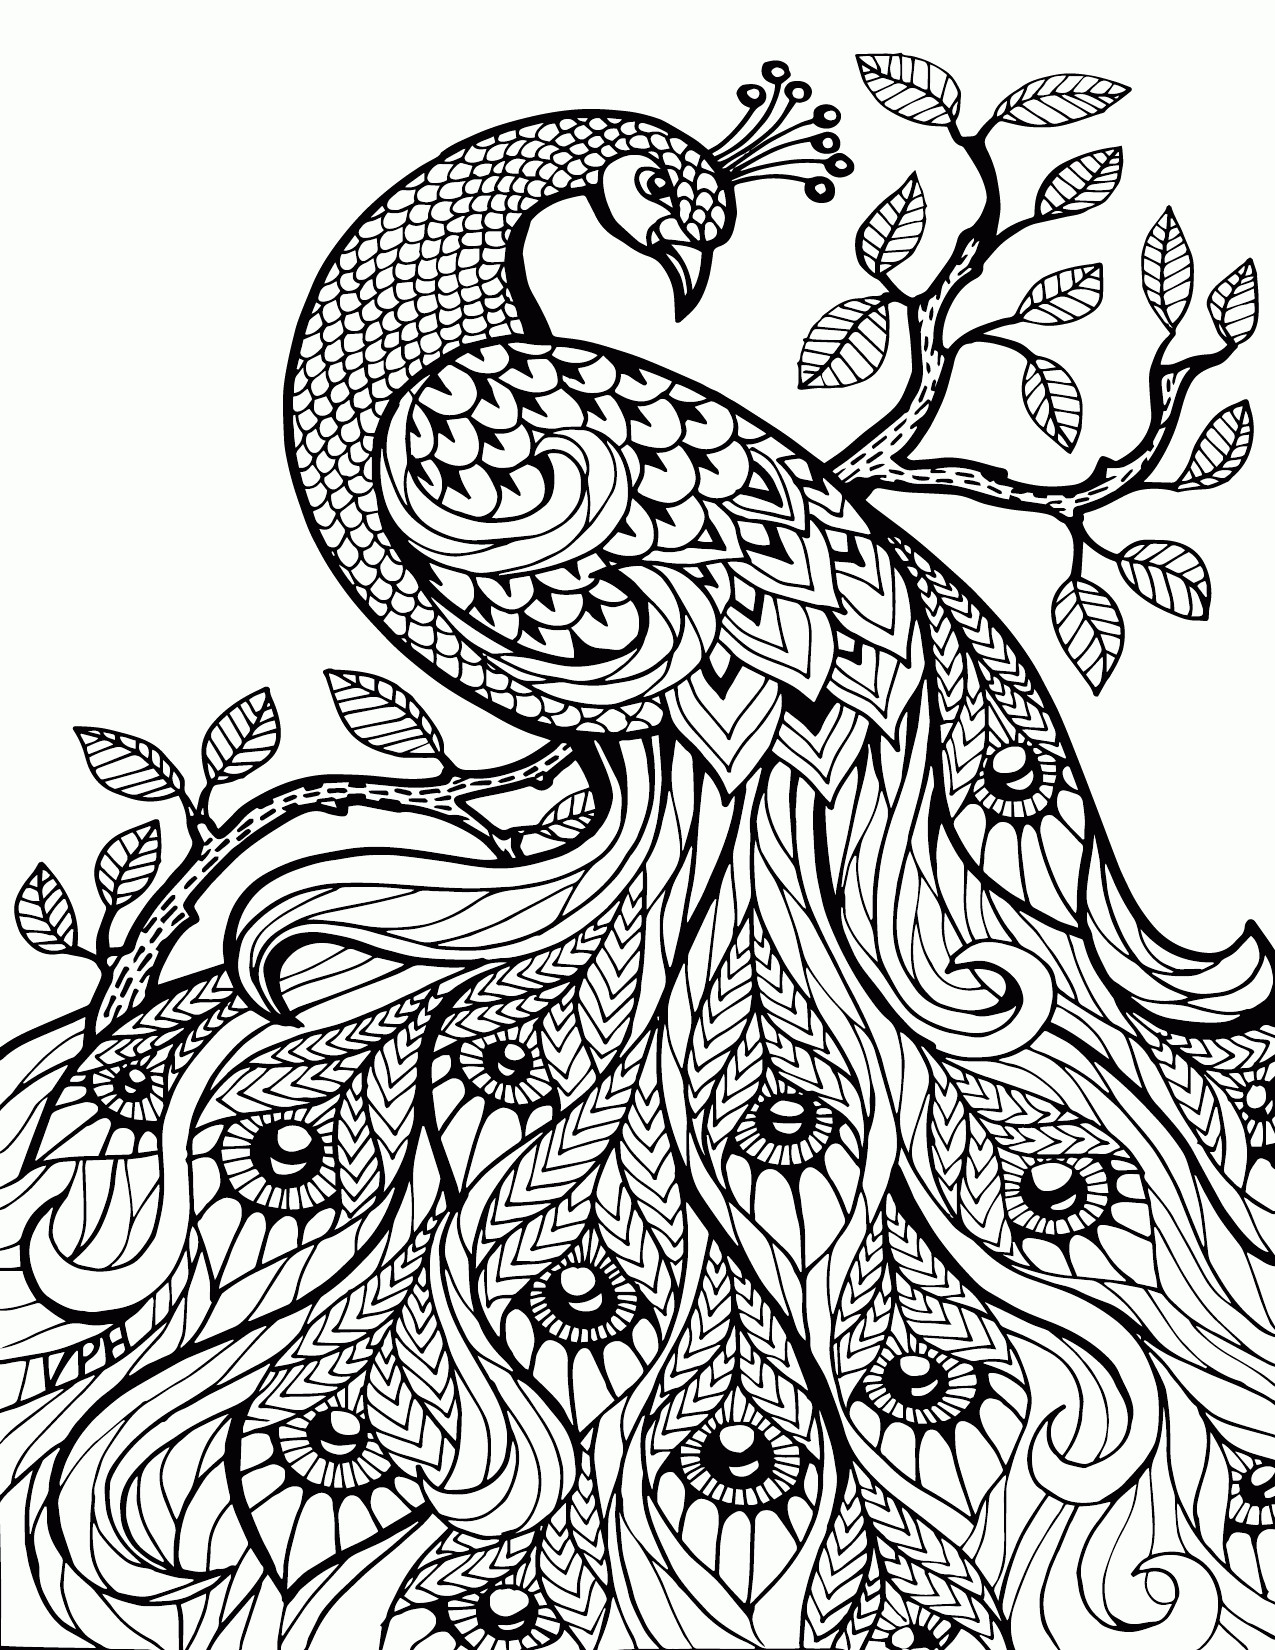 Stress Relief Coloring Pages Printable
 Adult Stress Relief Coloring Pages Printable Coloring